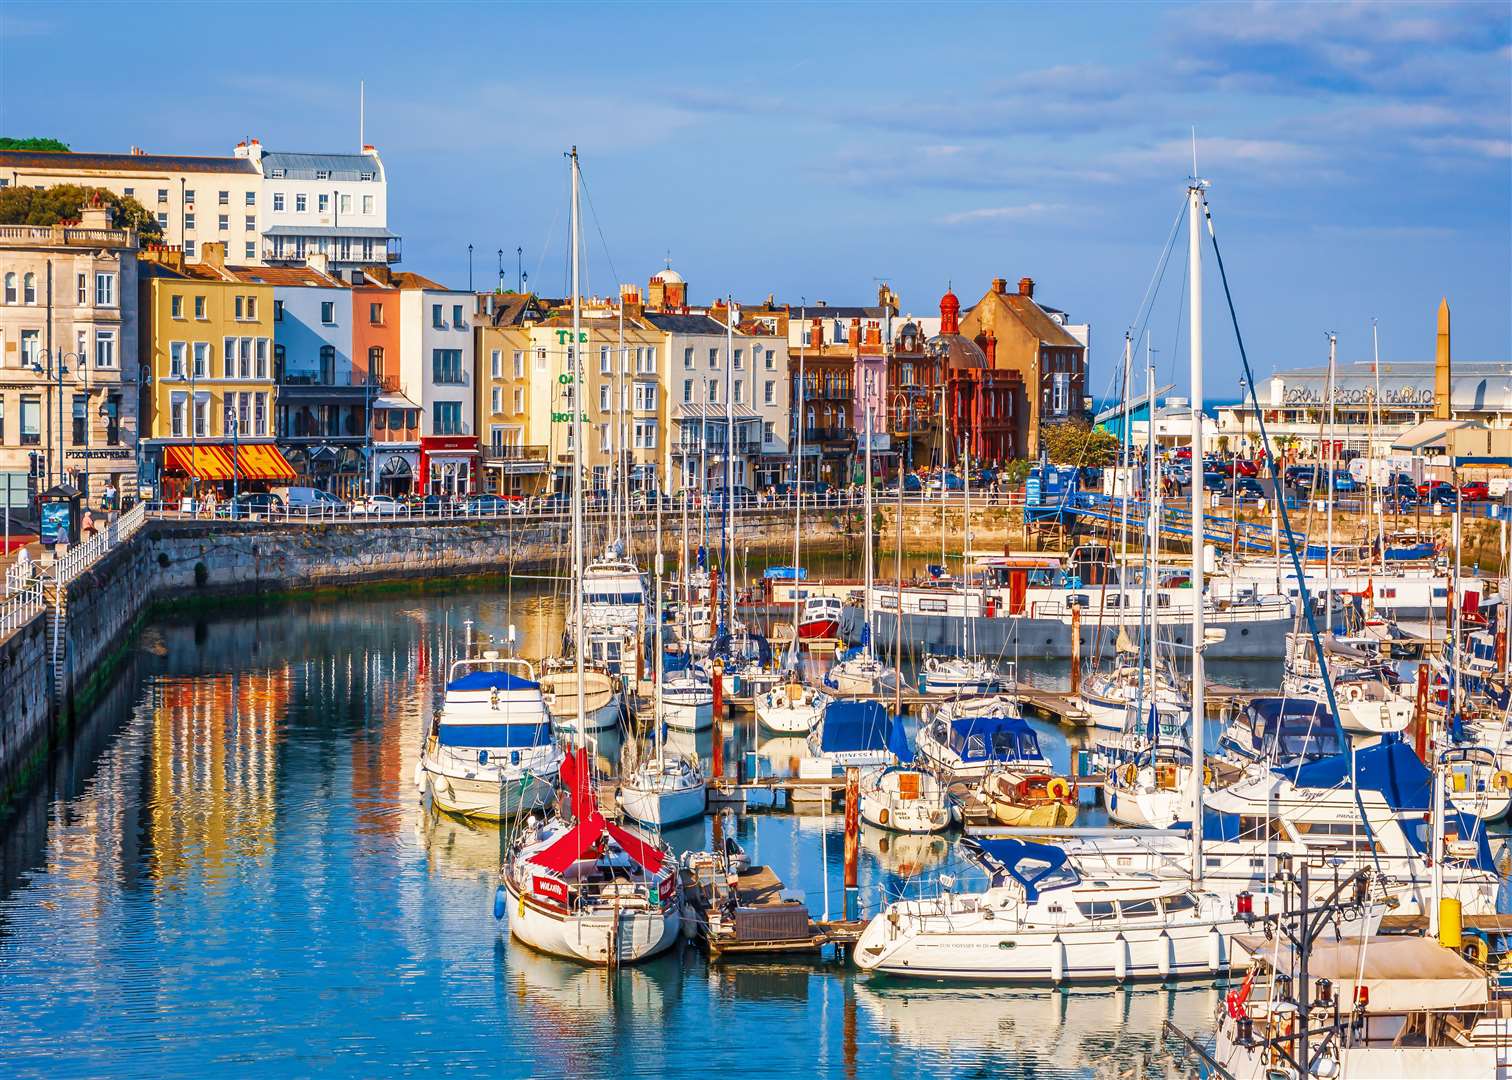 Ramsgate's Royal Harbour is certainly picturesque but the town struggles to outshine its Thanet neighbours